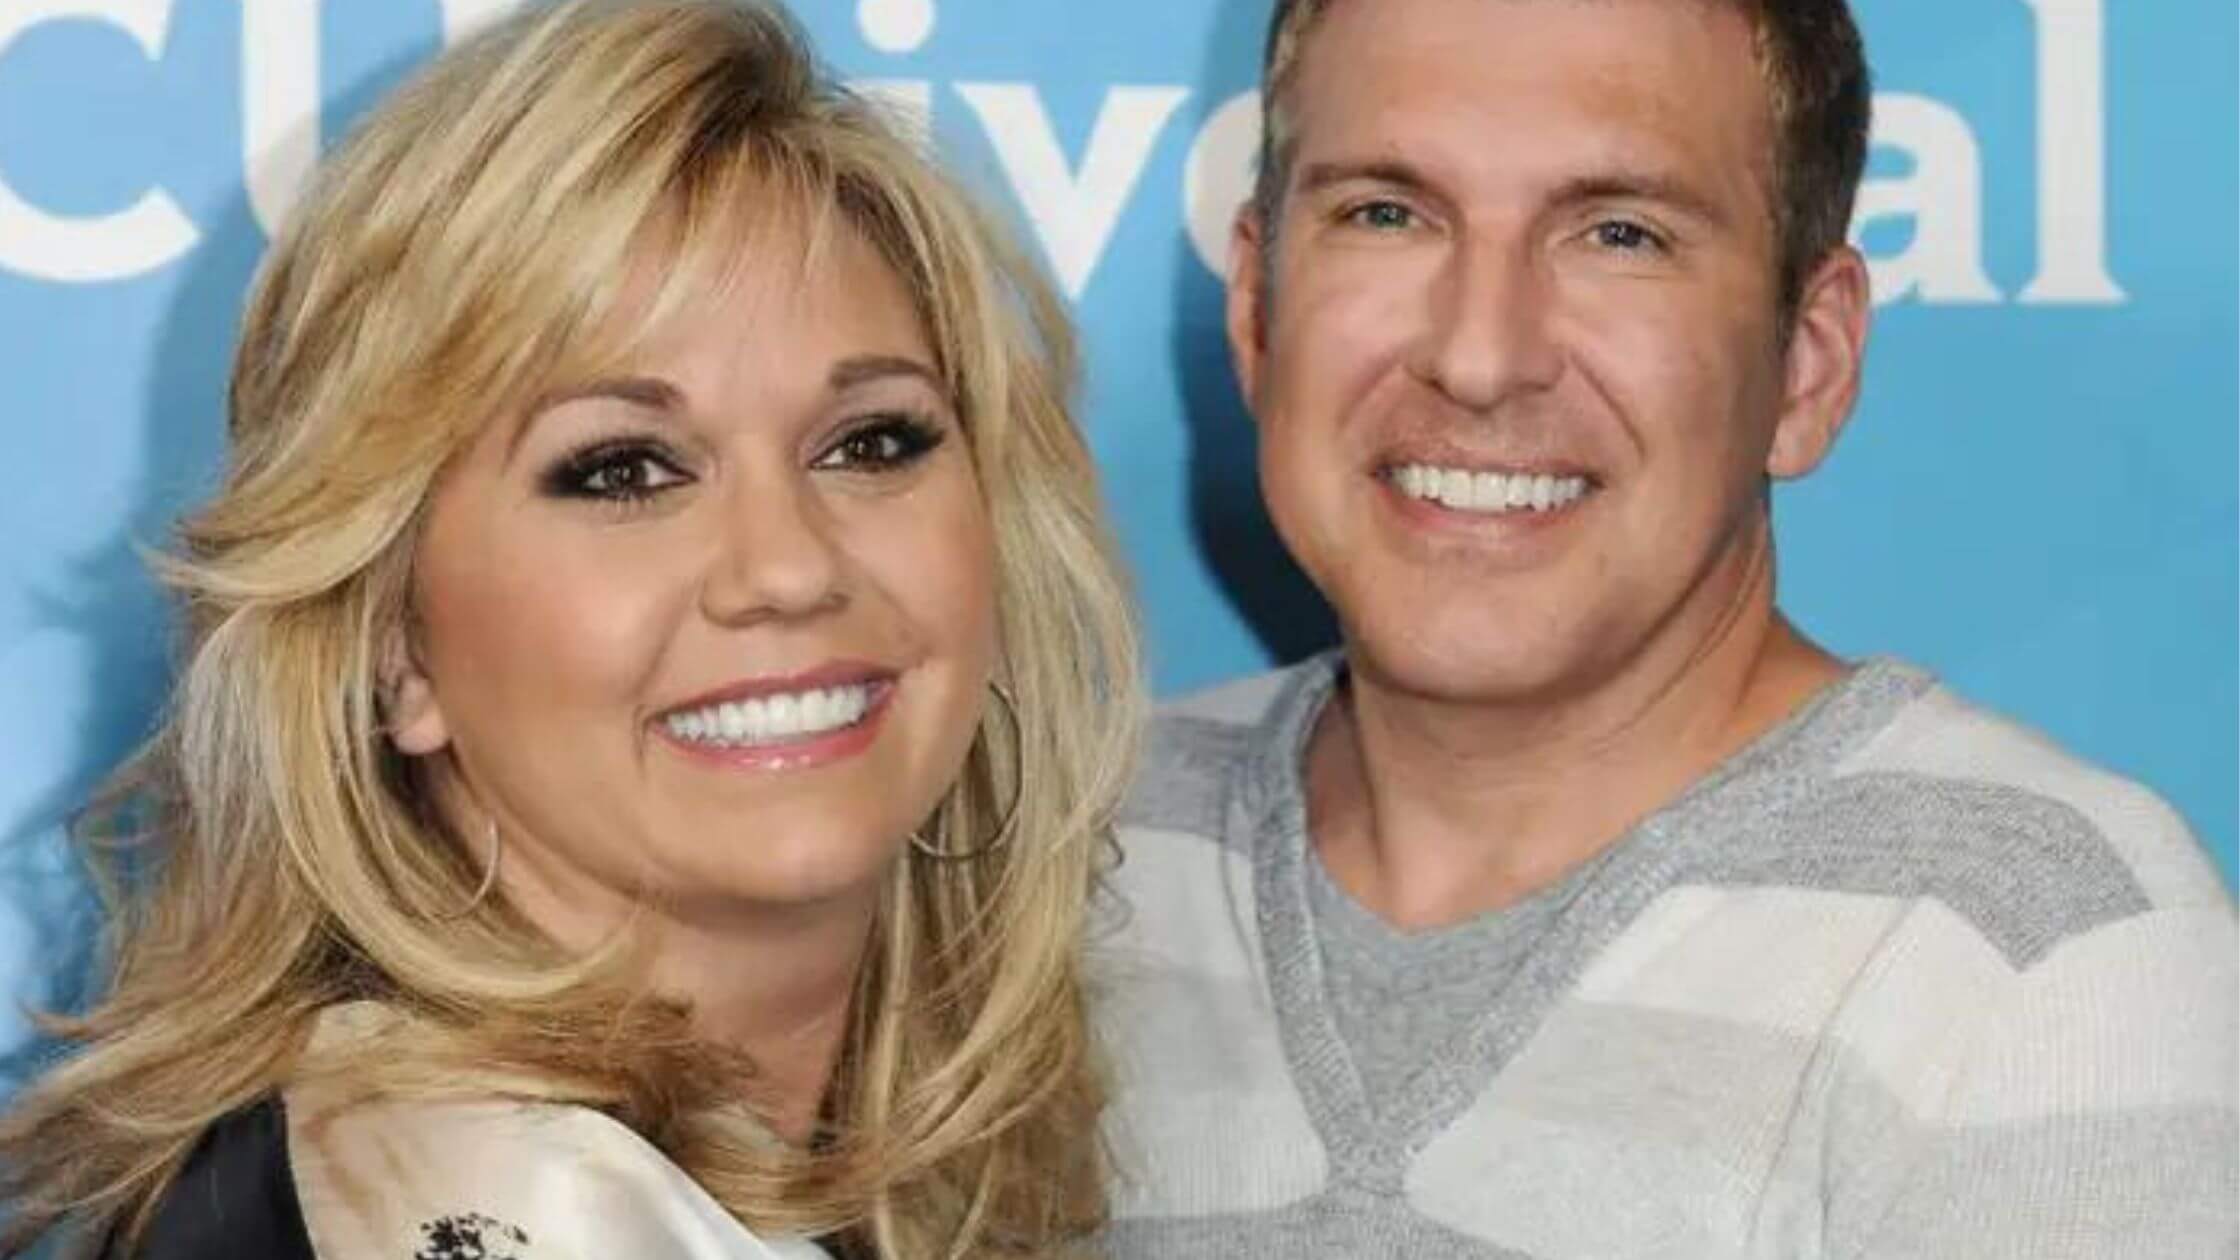 Todd Chrisley And His Wife Julie Chrisley Were Found Guilty Of Bank Fraud And Tax Evasion